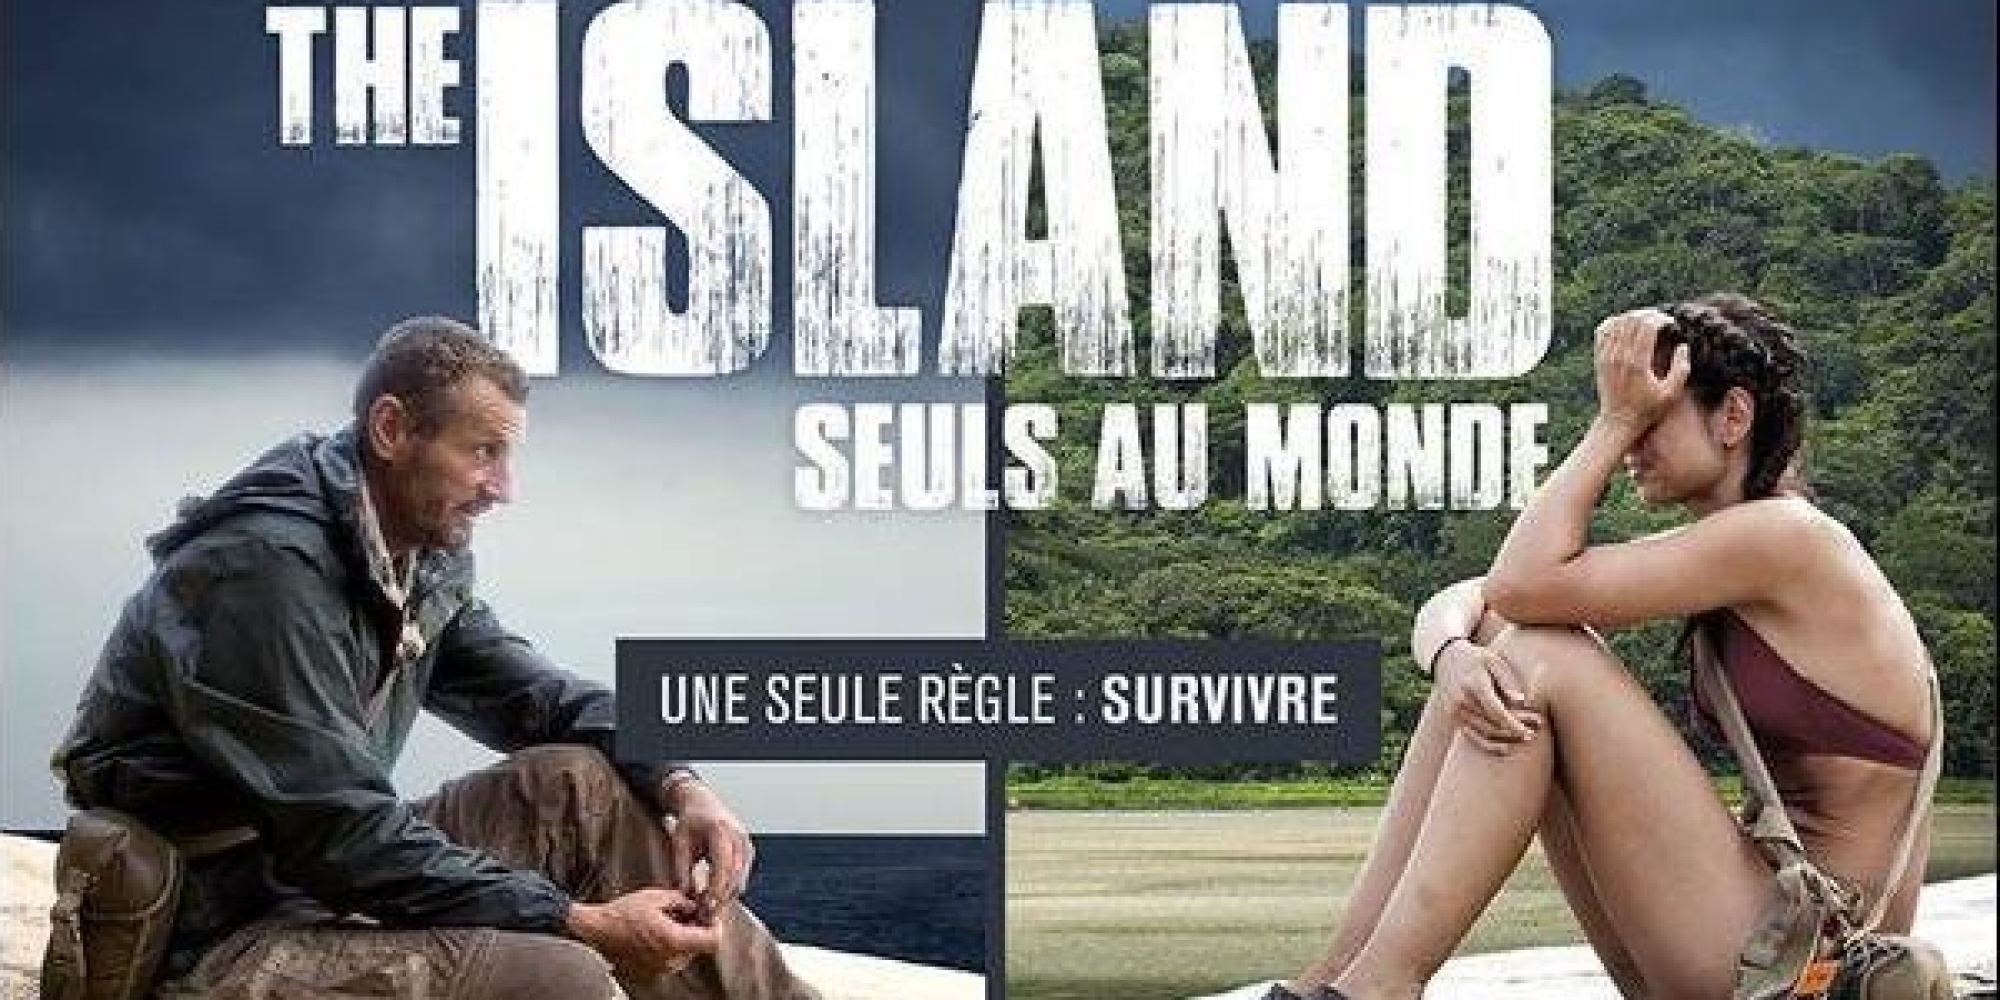 The Island Pics, Movie Collection